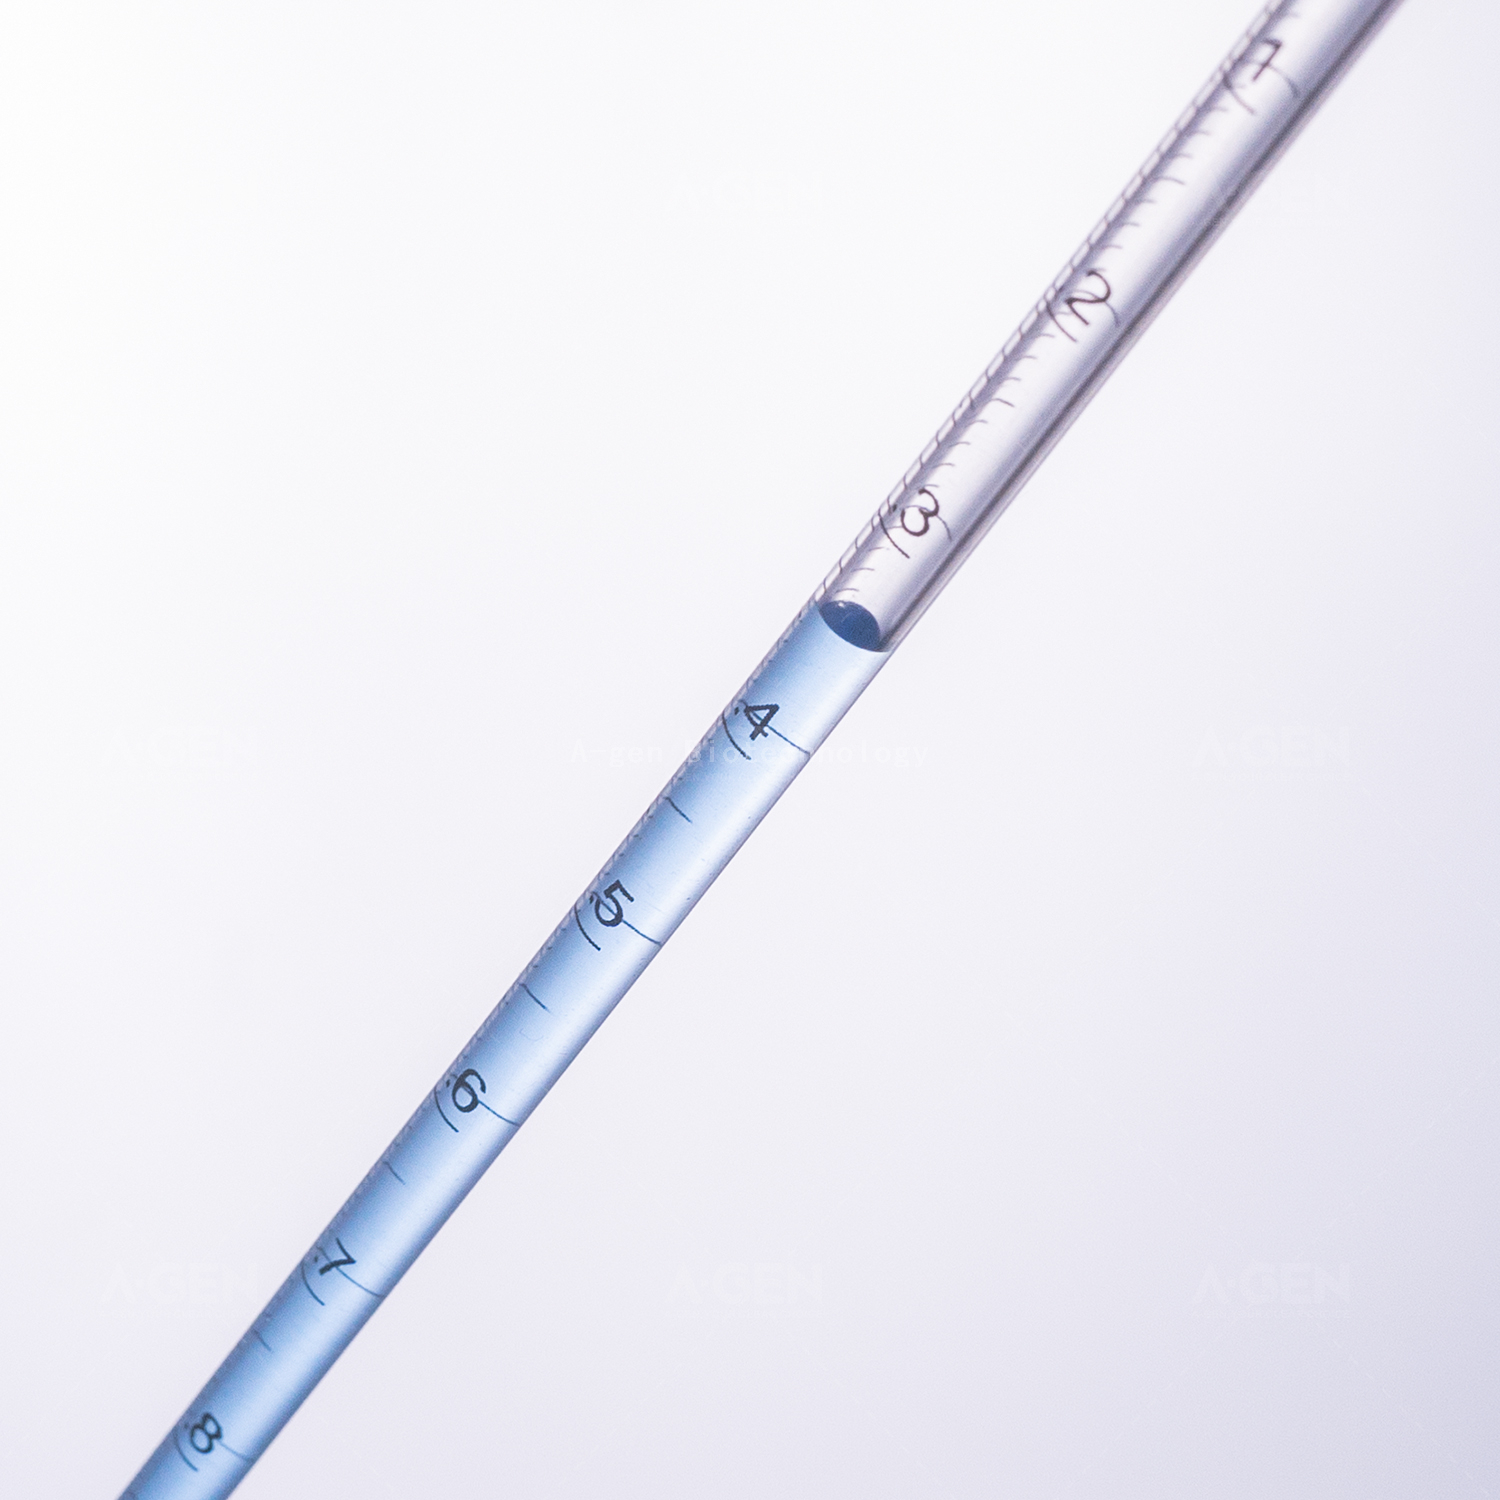 1ml Serological Pipette,sterile customized in Individual Paper Bag Or Polybag